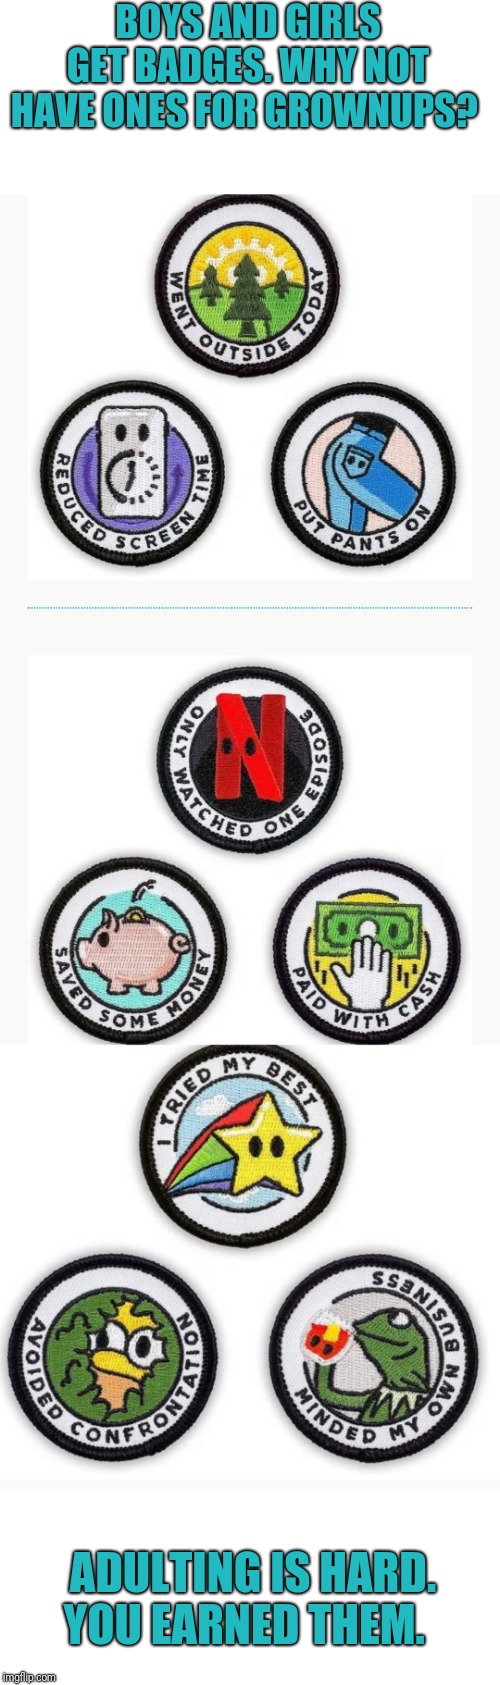 clip art - Boys And Girls Get Badges. Why Not Have Ones For Grownups? Went Oday Puts Side Peduc Time Sed Sc Peeni Pan Pant Only oslo Watc Cheo One Saved Now Paid Cash Some With Bes Ried 17 Ssens Avoid Cation sna Deo Mind Oner Ped M Rontu Adulting Is Hard.